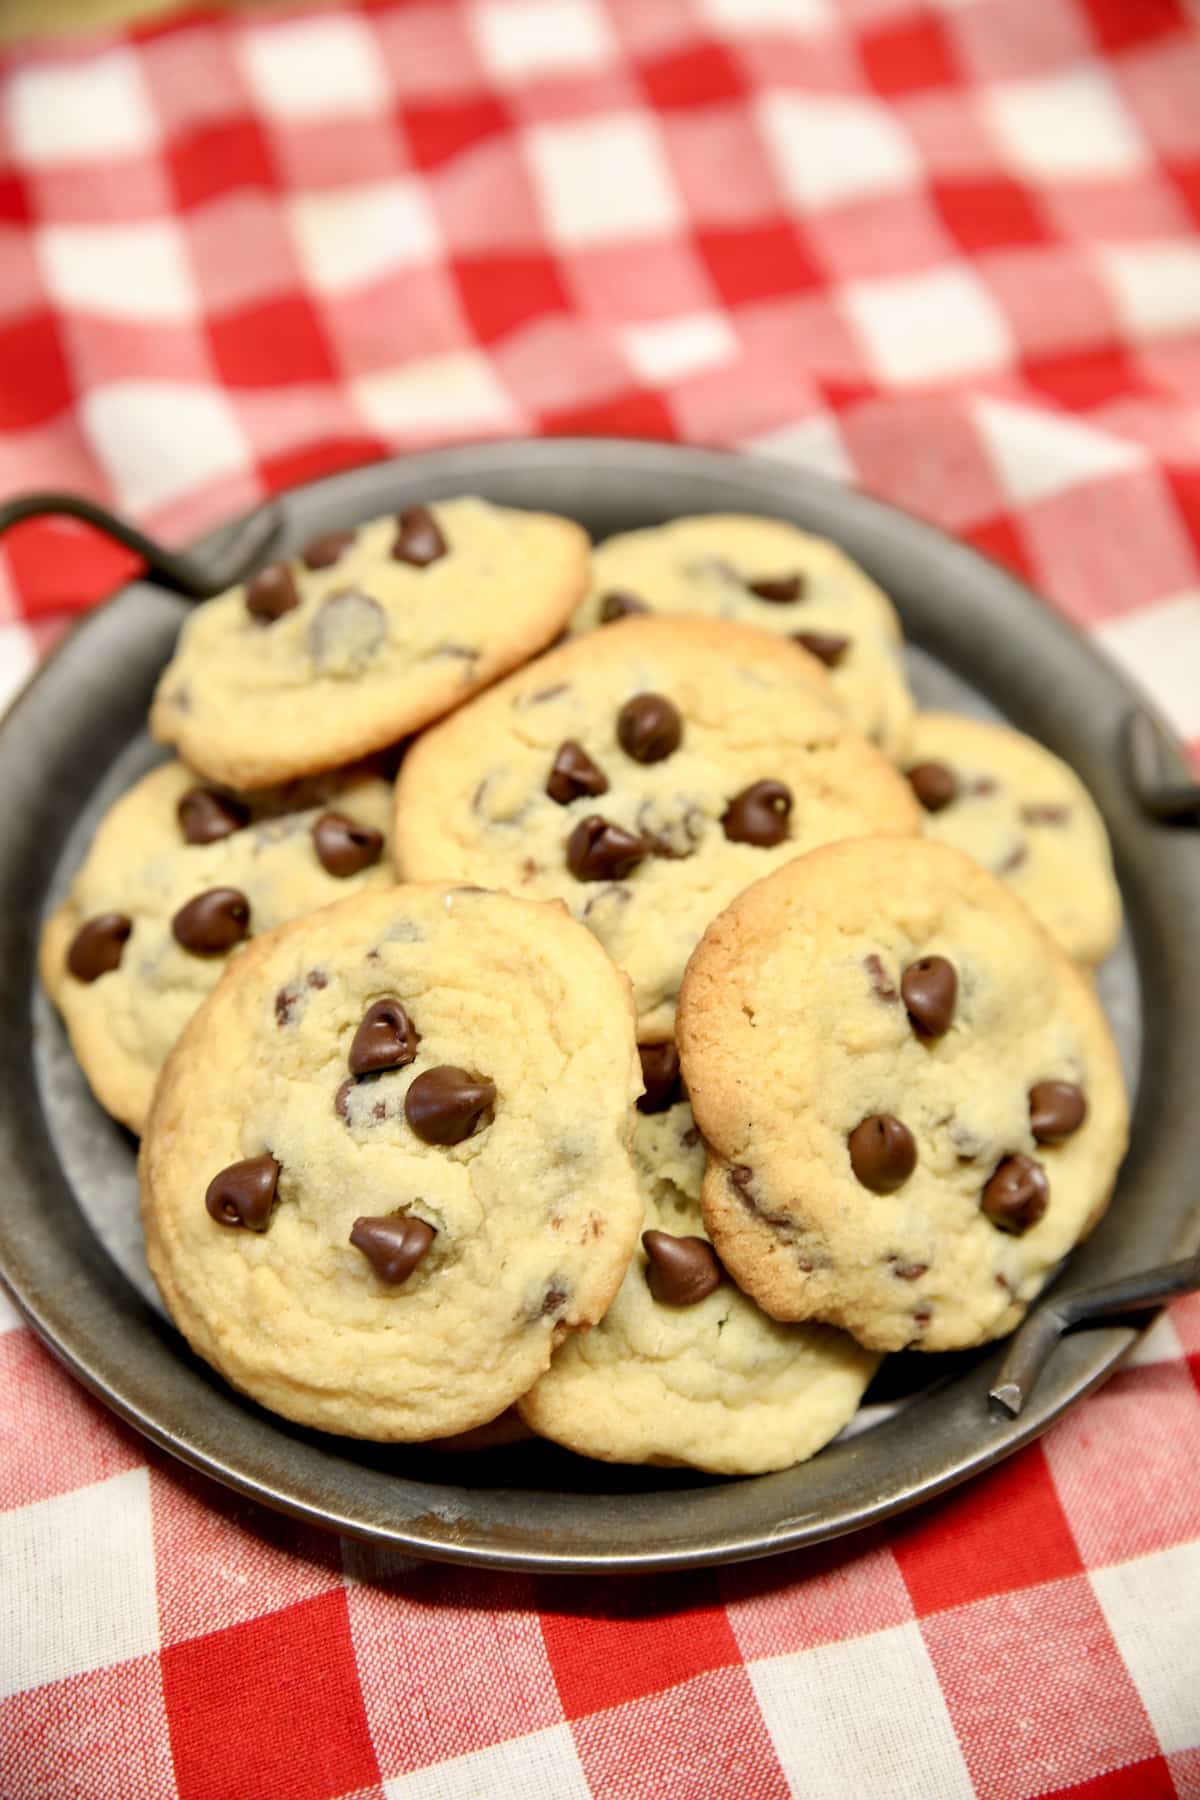 Plate of chocolate chip cookies on a red check napkin.